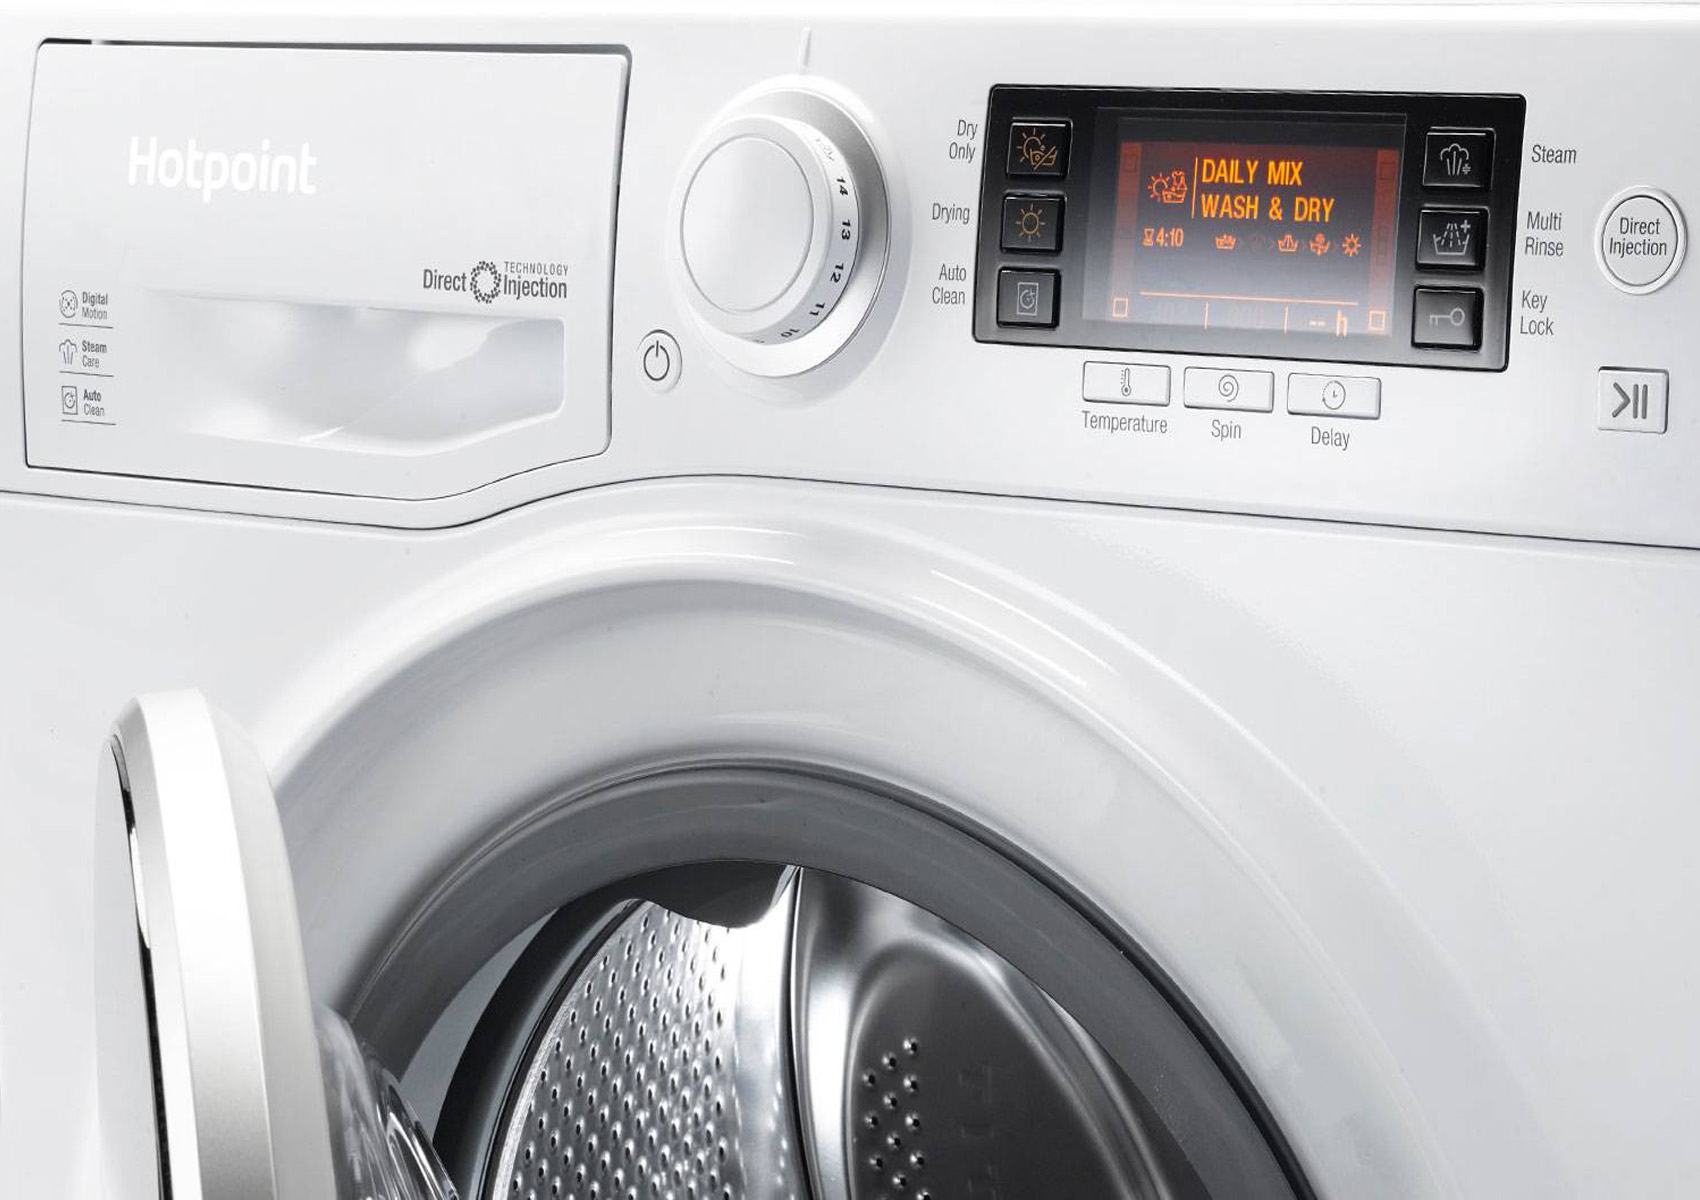 How To Reset Hotpoint Dryer 2.0